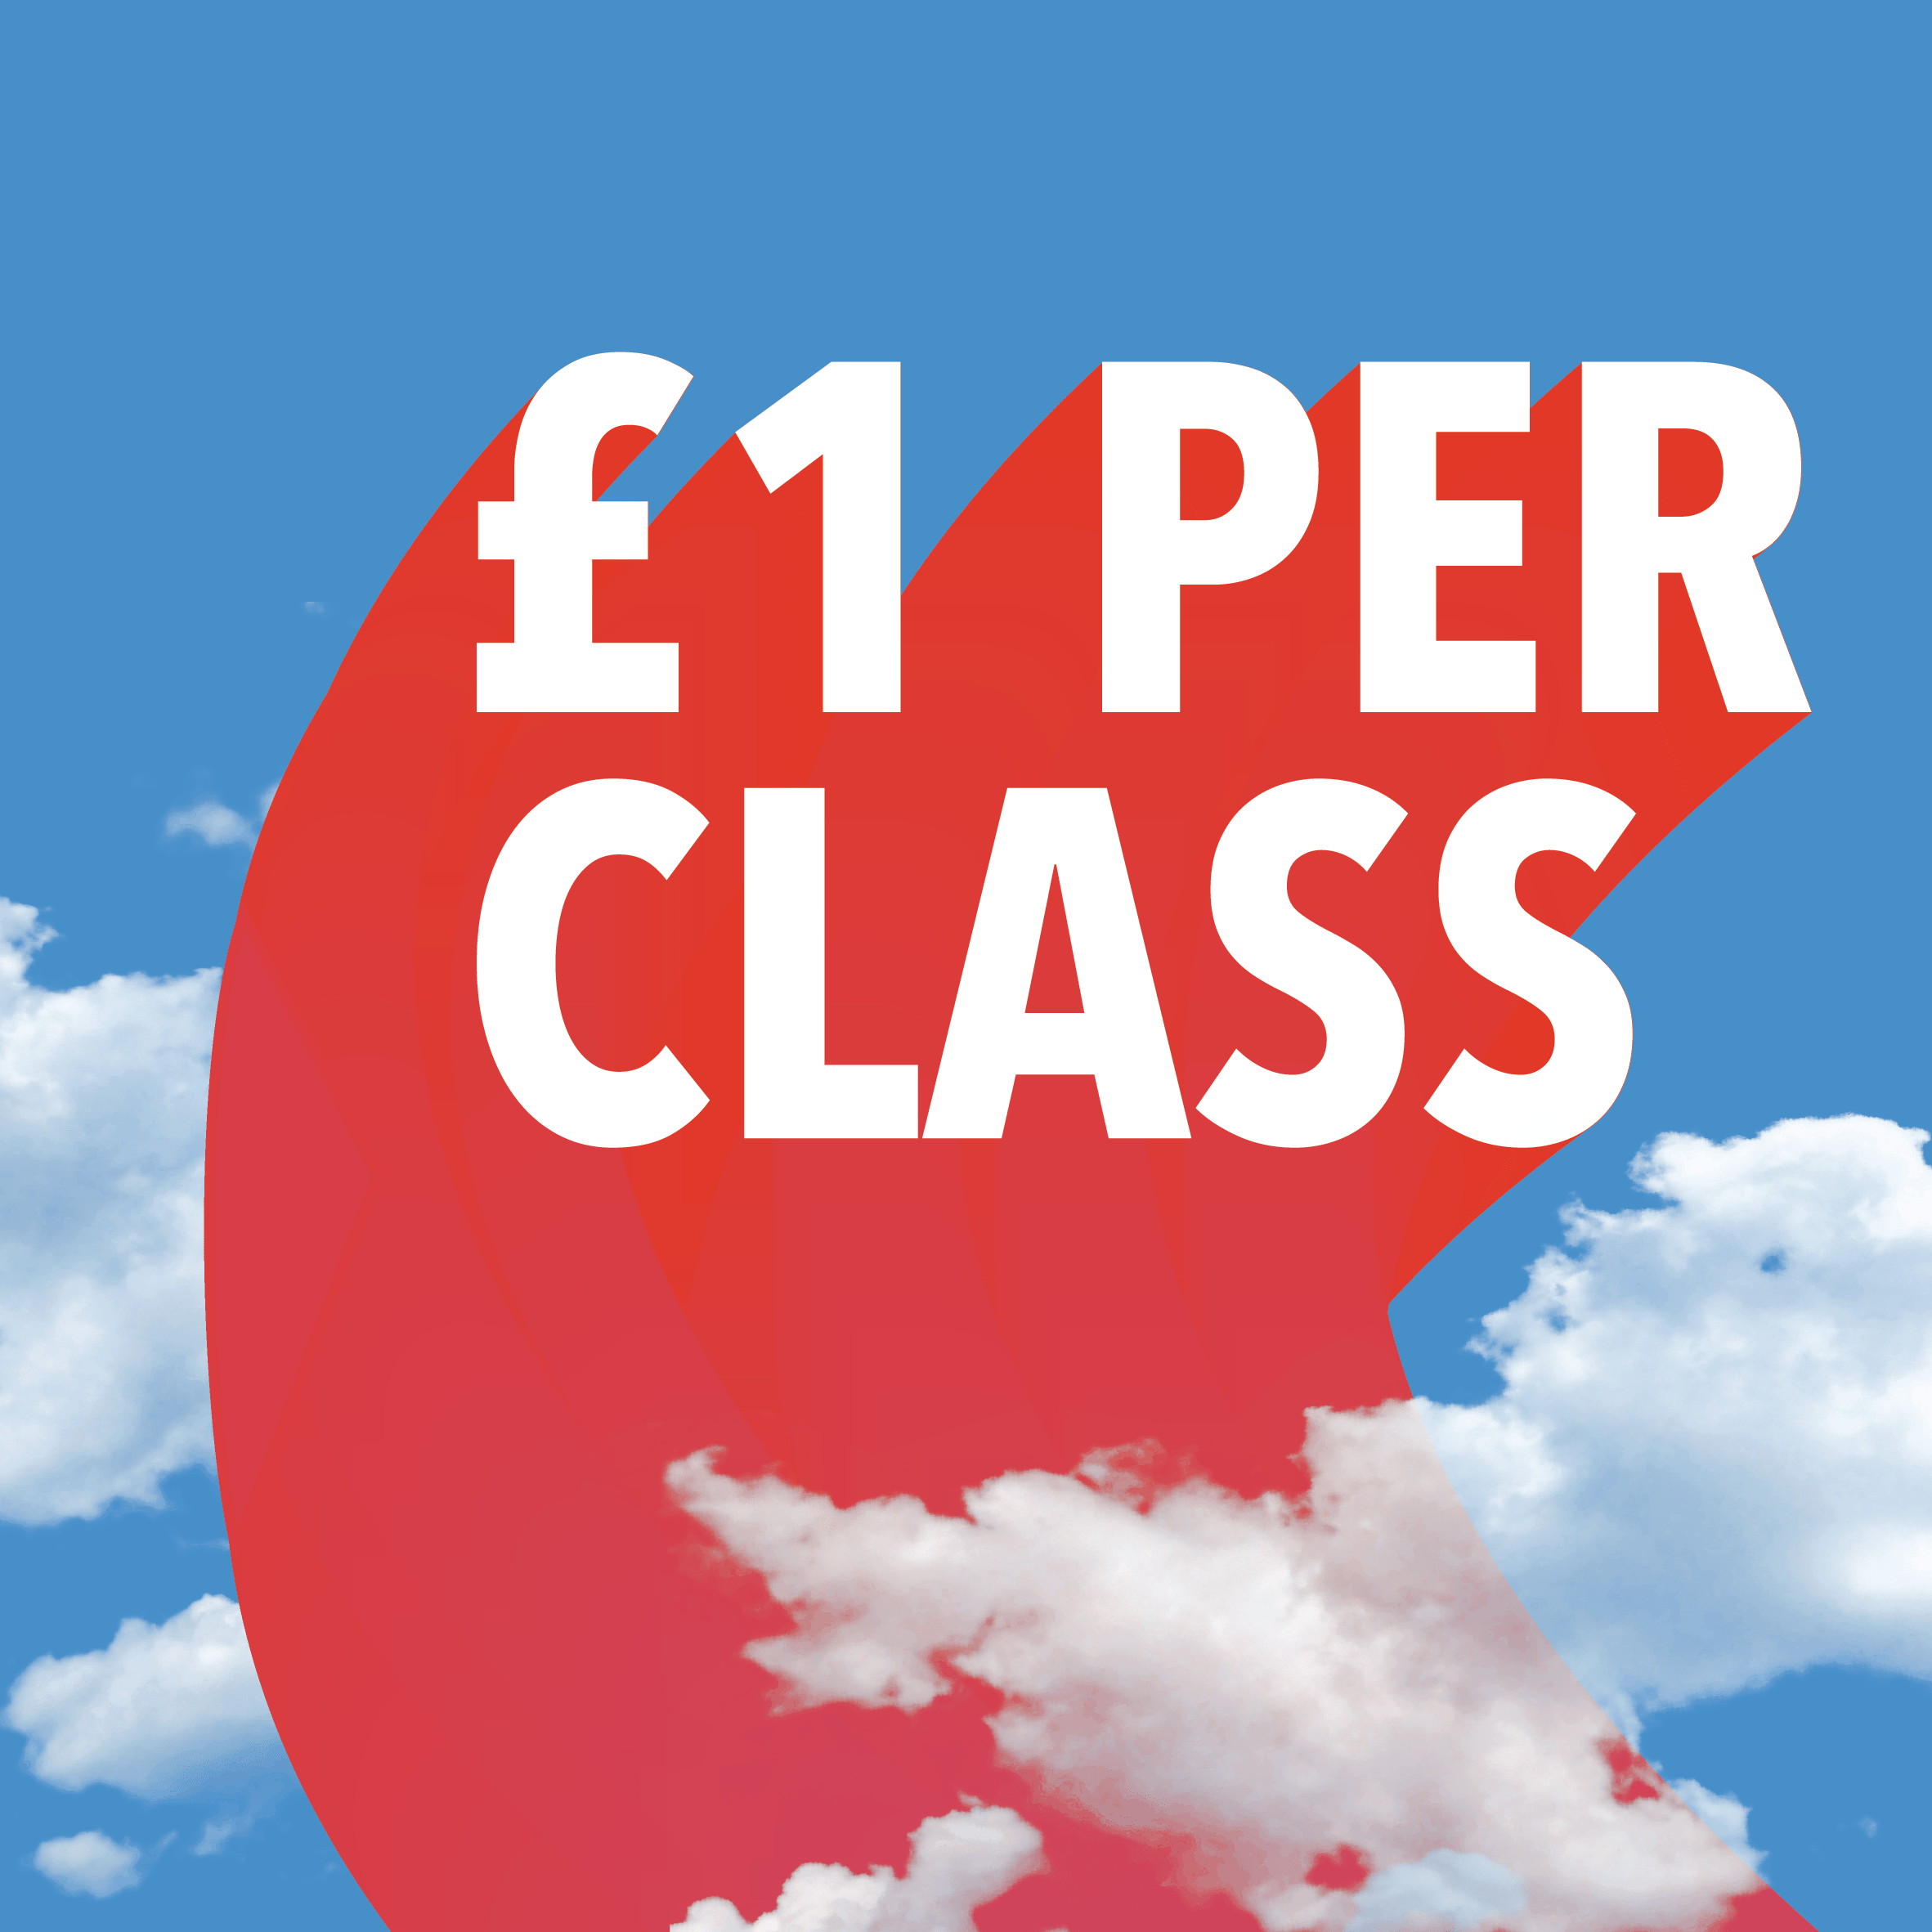 £1 Classes: How to book step-by-step